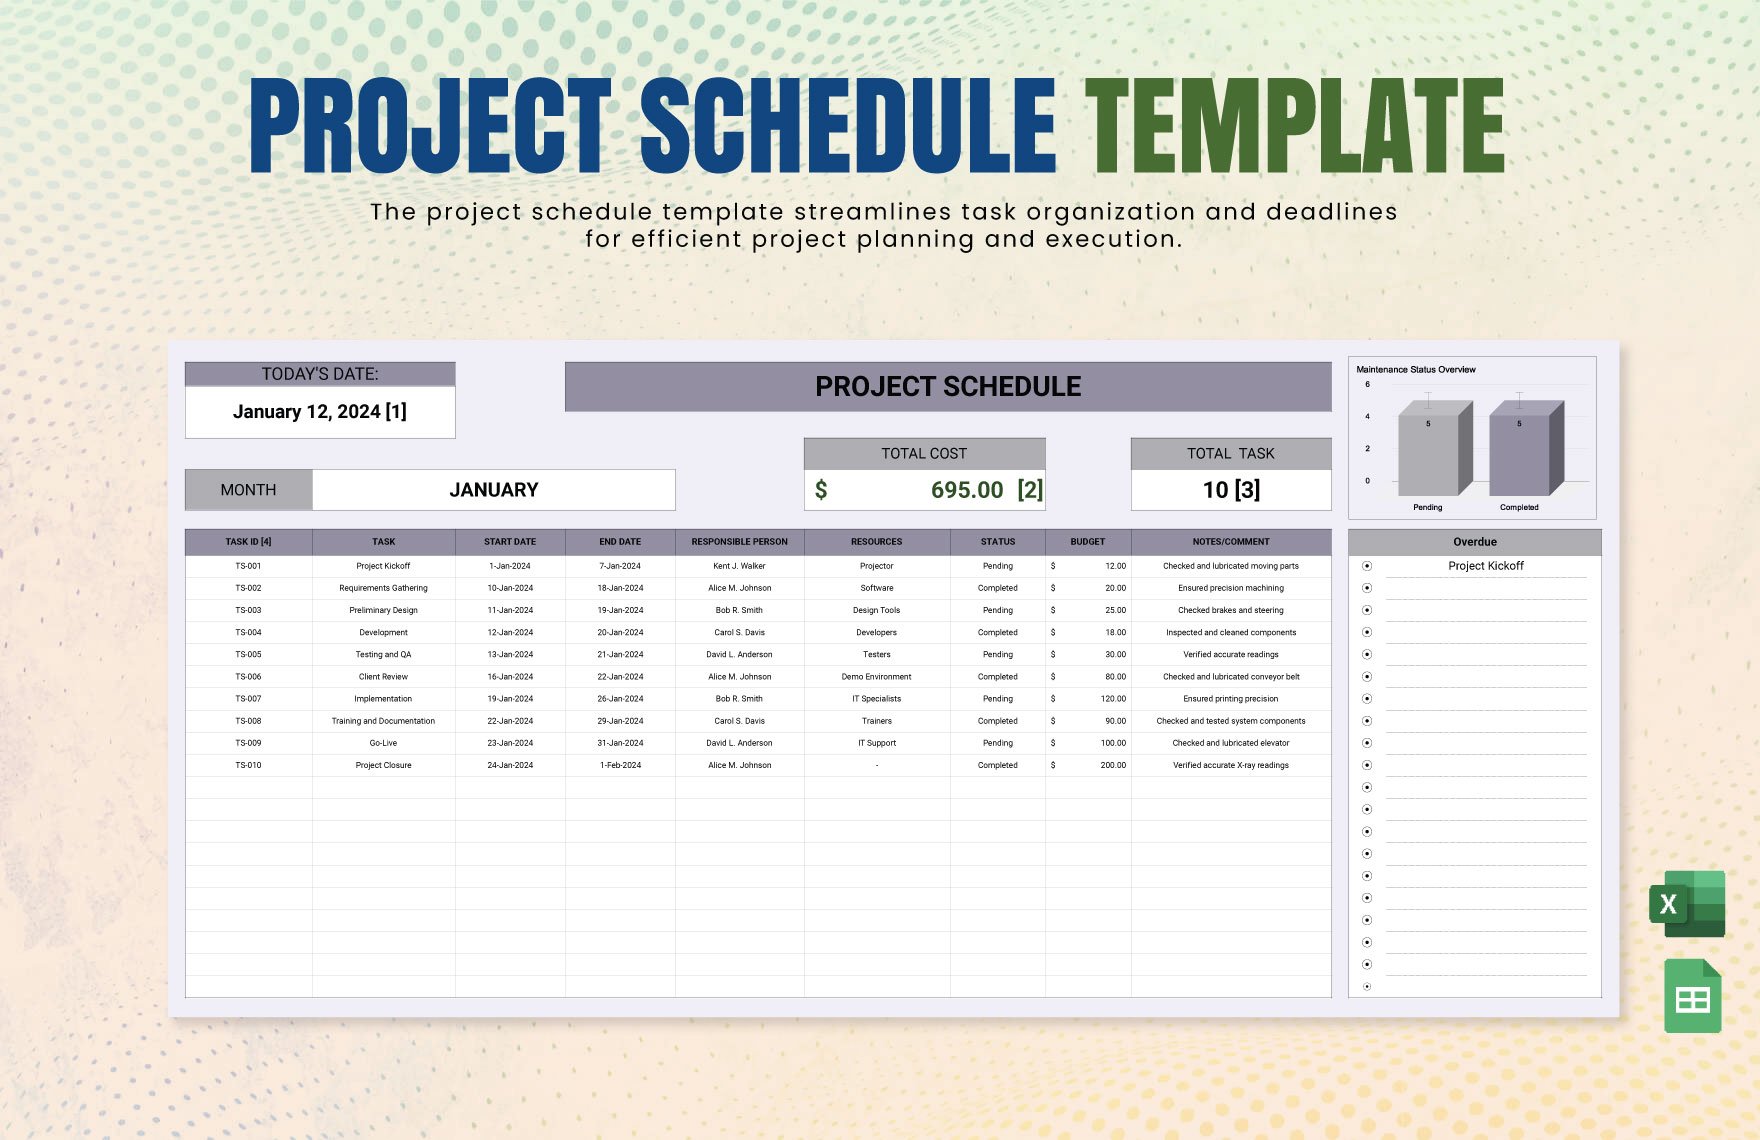 Project Schedule Template in Excel